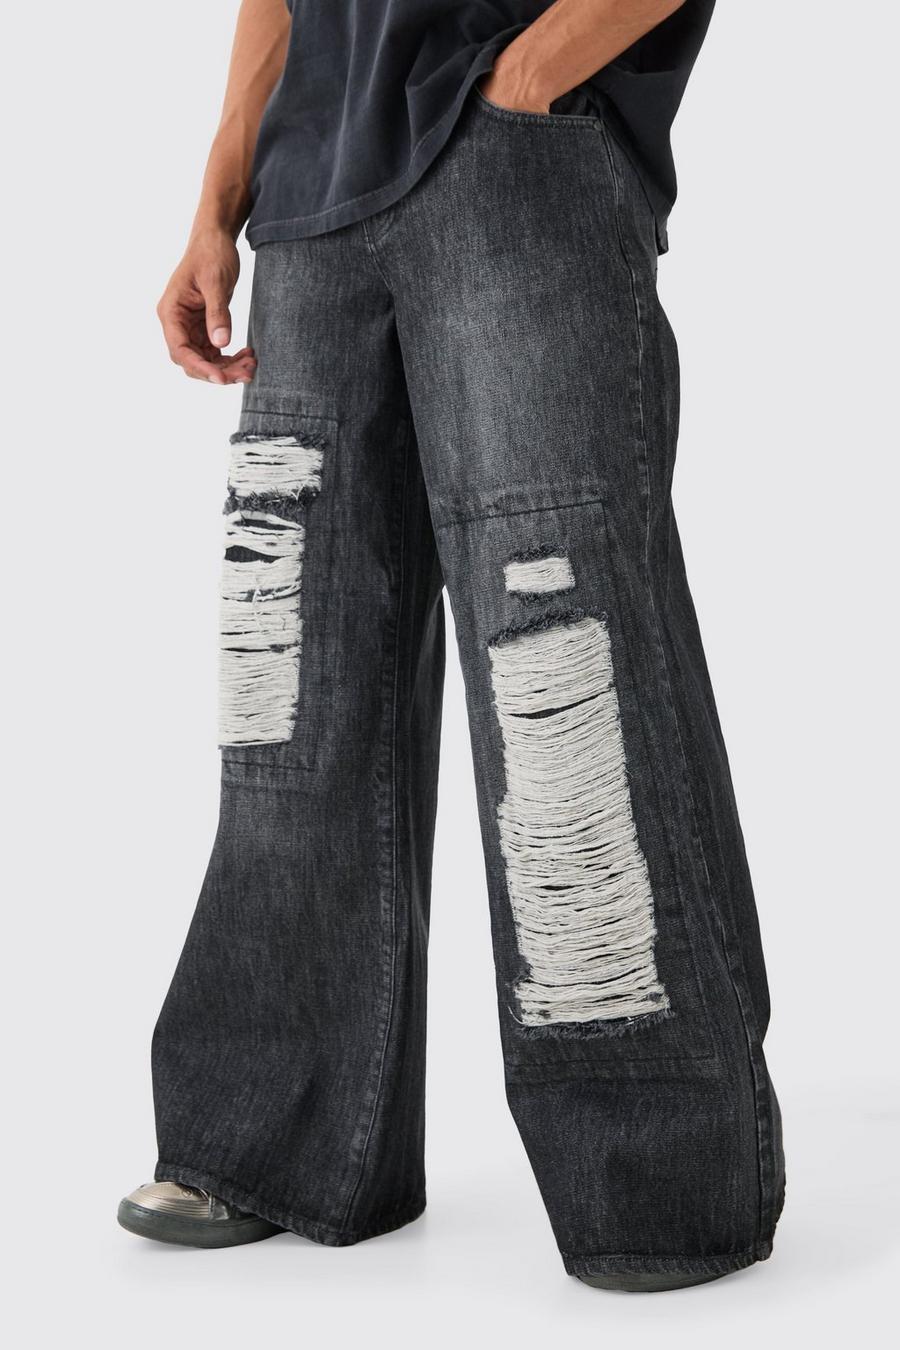 Baggy Rigid Extreme Ripped Denim Jean In Washed Black